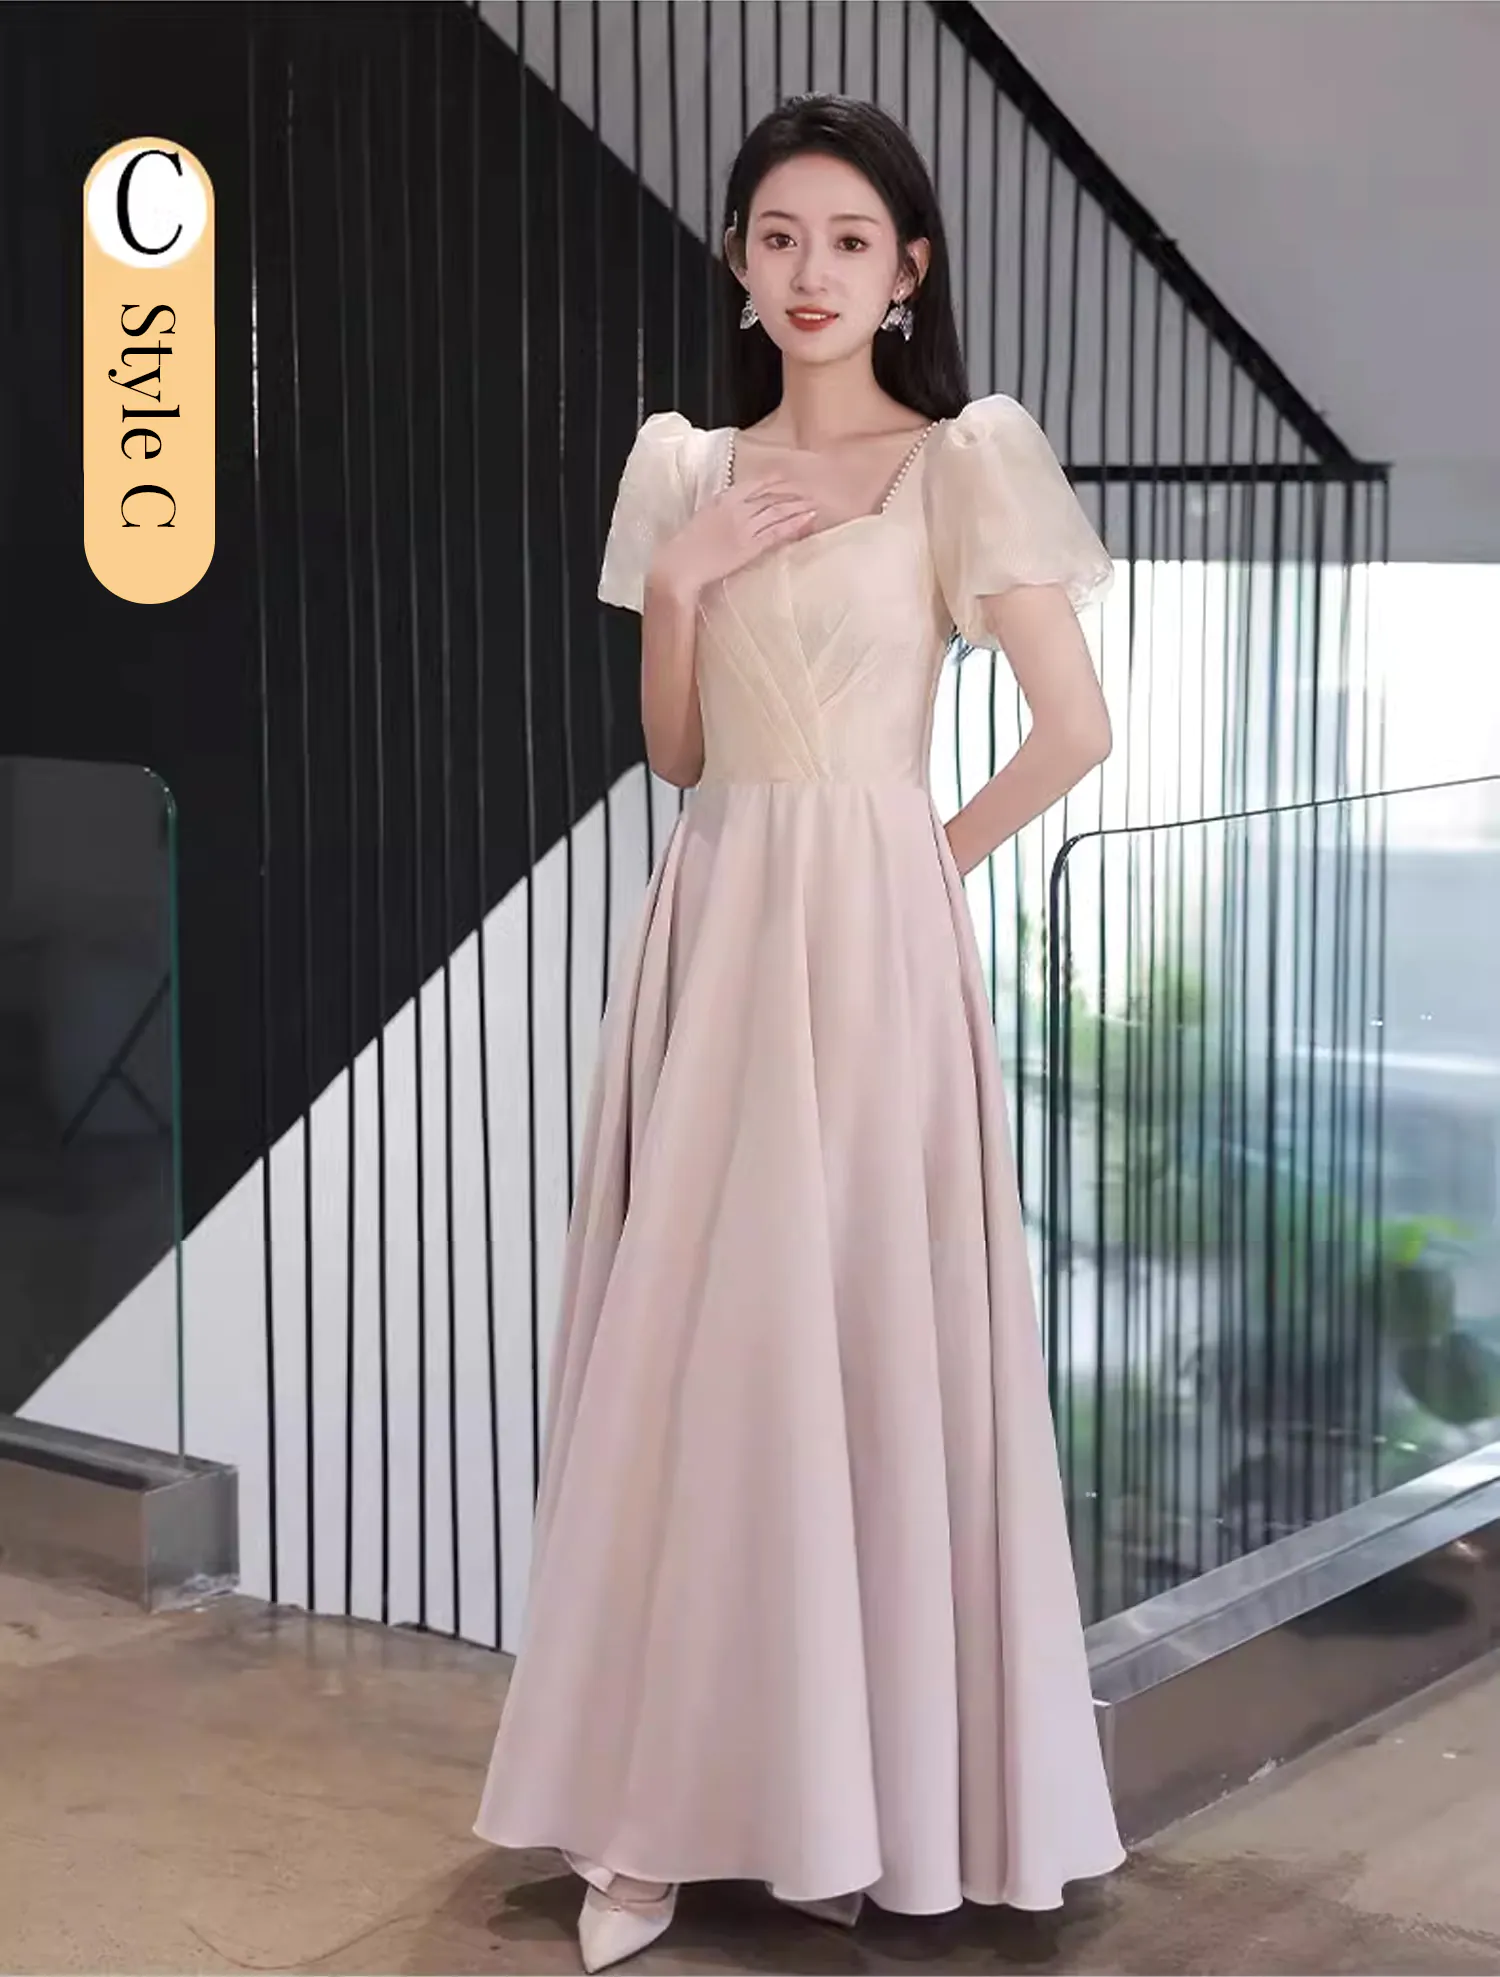 Simple-Pink-Short-Sleeve-Bridesmaid-Dress-Homecoming-Graduation-Gown18